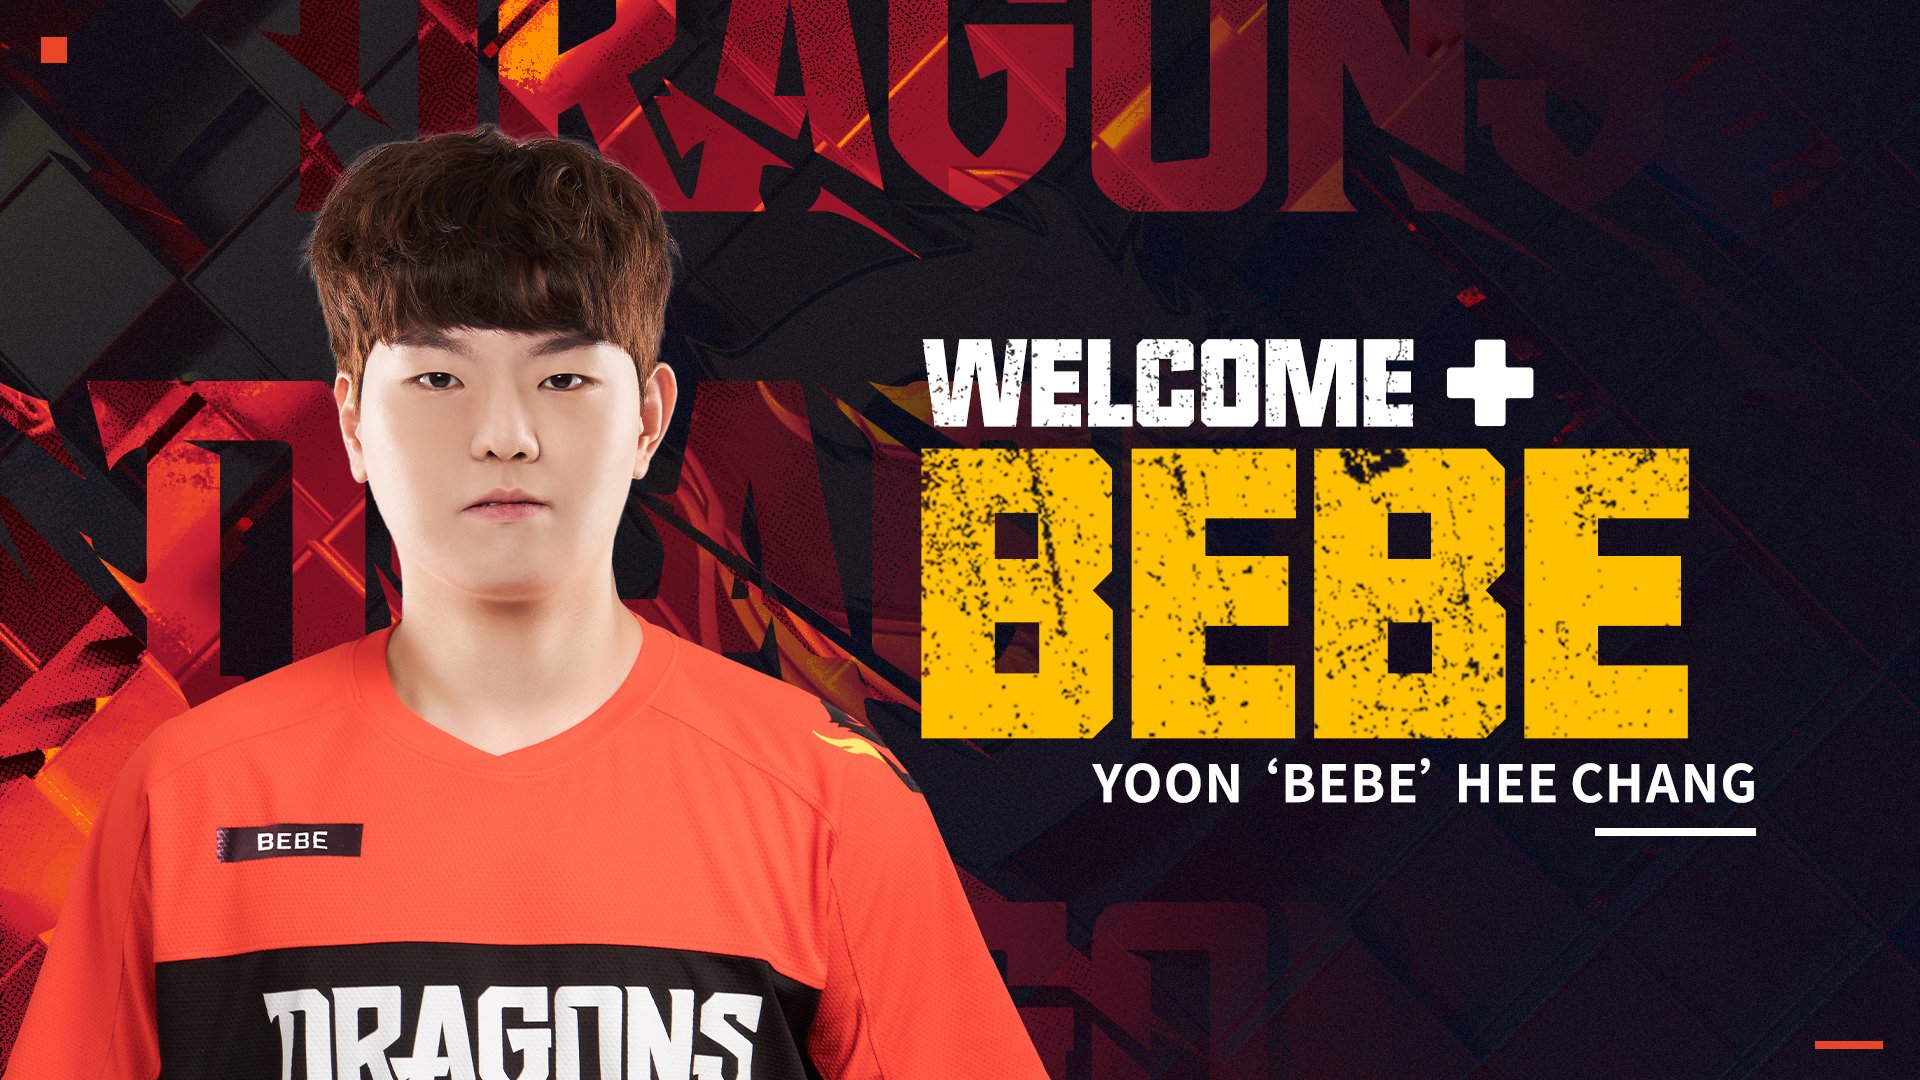 The words "Welcome Bebe" appear alongside a profile picture of Hui-chang "BeBe" Hoon in his Shanghai Dragons jersey